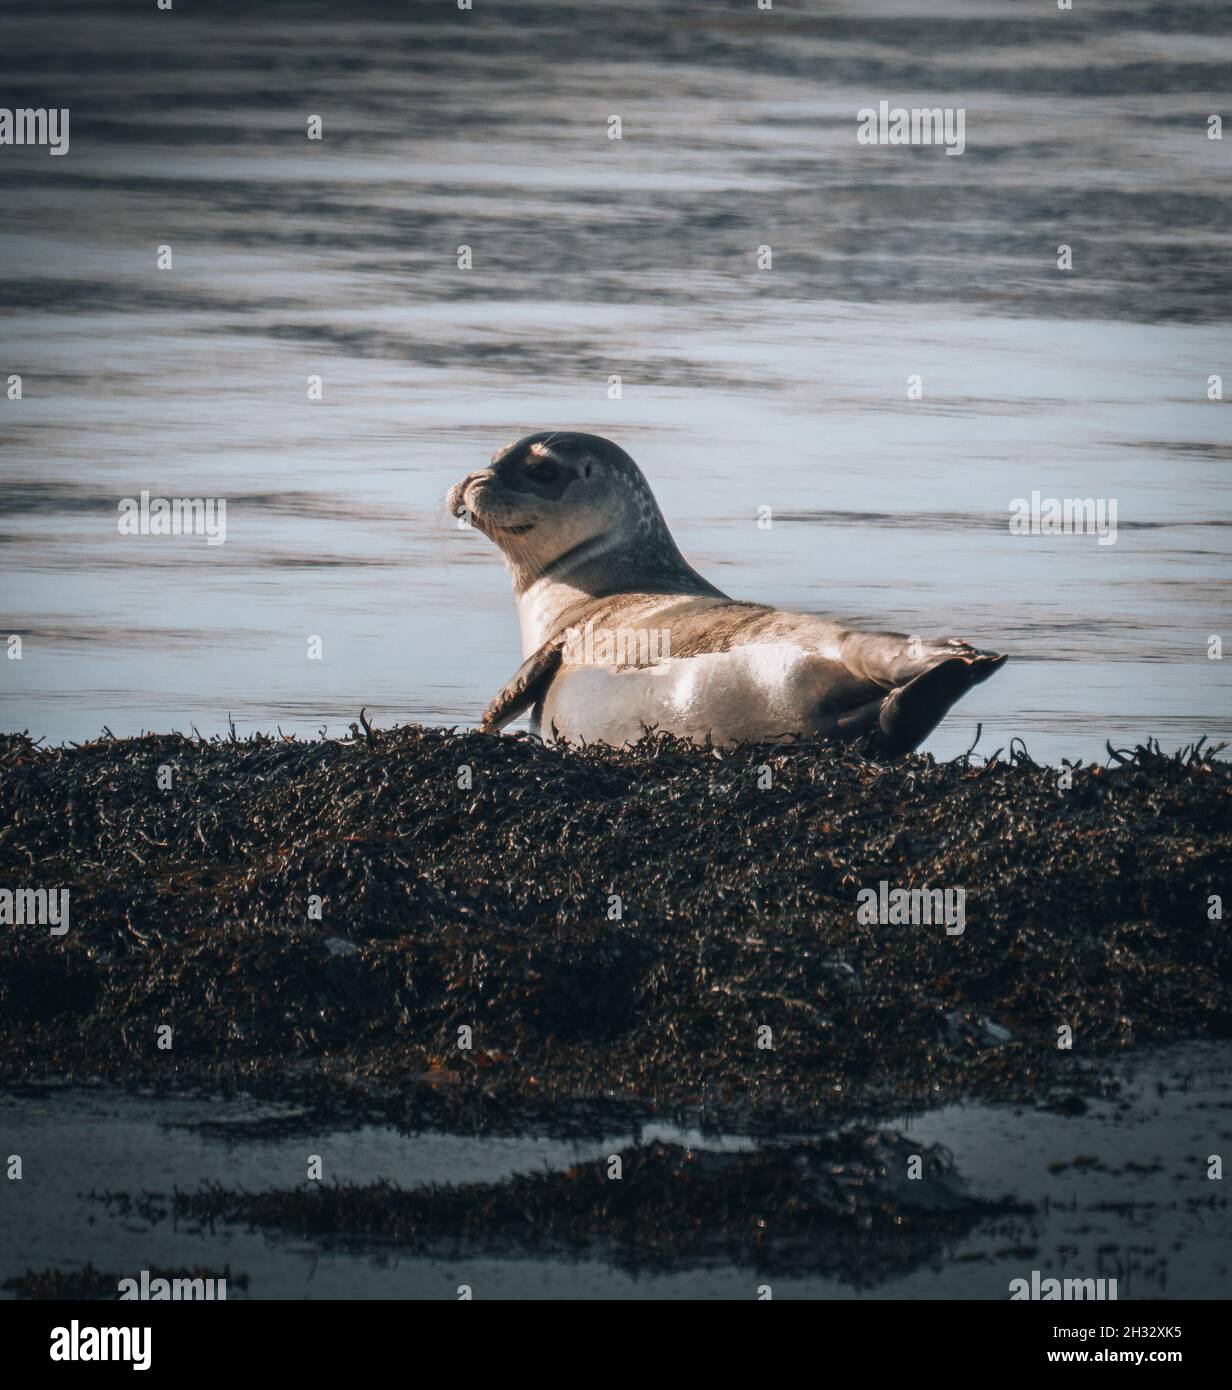 Iceland seals in the water. Relax on the seaweed. Rocks, animals in the habitat of nature Along the North Sea coast Stock Photo